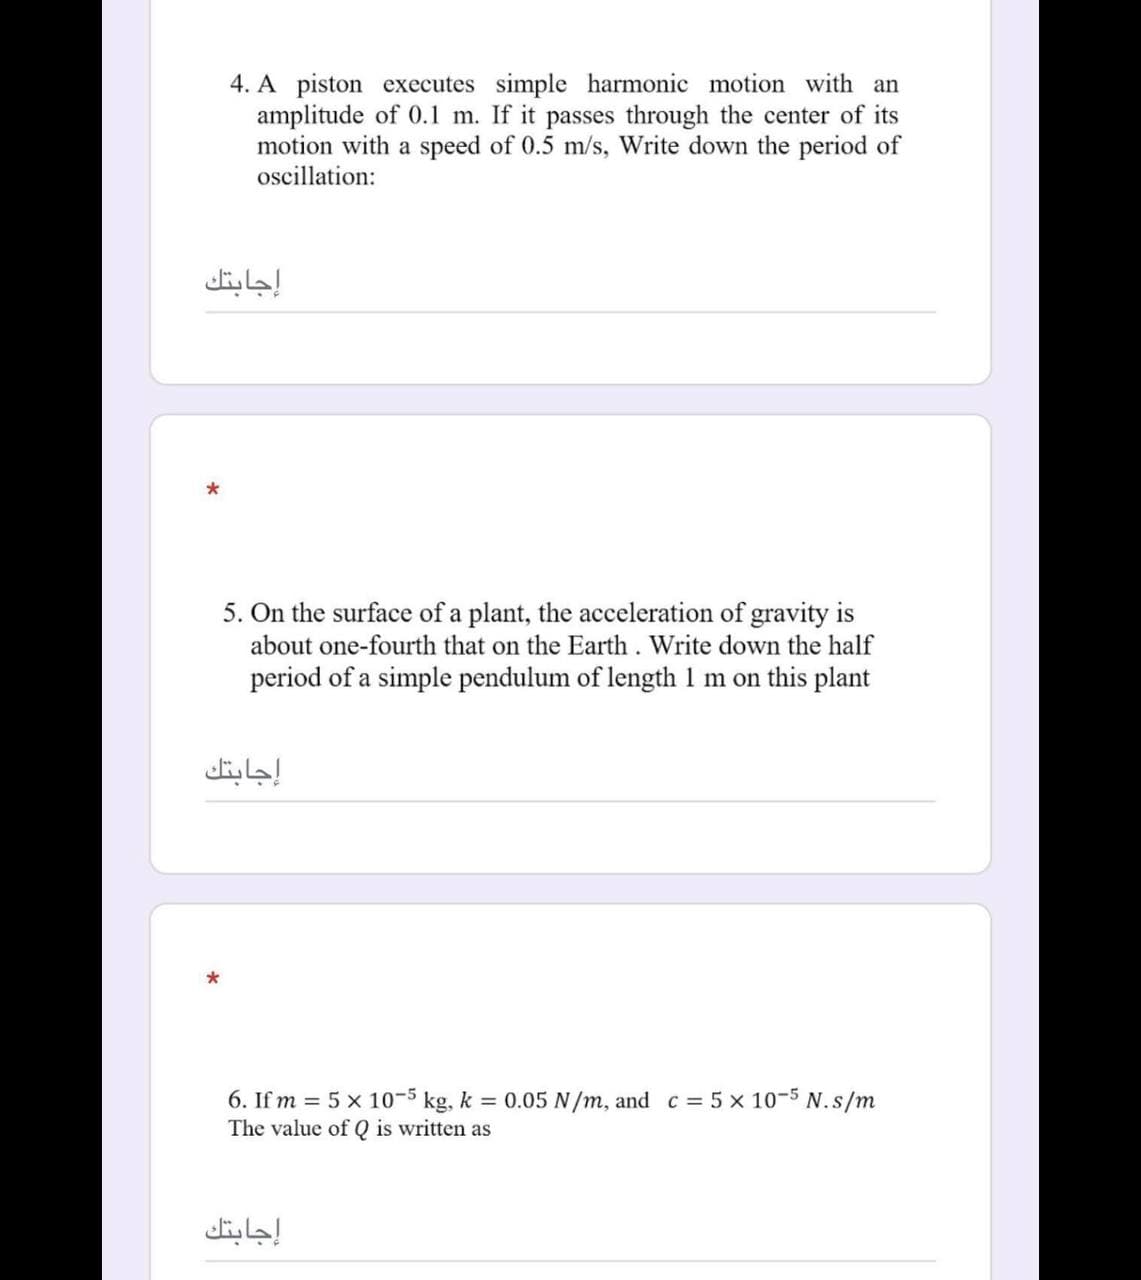 4. A piston executes simple harmonic motion with an
amplitude of 0.1 m. If it passes through the center of its
motion with a speed of 0.5 m/s, Write down the period of
oscillation:
إجابتك
5. On the surface of a plant, the acceleration of gravity is
about one-fourth that on the Earth. Write down the half
period of a simple pendulum of length 1 m on this plant
إجابتك
6. If m = 5 x 10-5 kg, k = 0.05 N/m, and c = 5 x 10-5 N.s/m
The value of Q is written as
إجابتك
